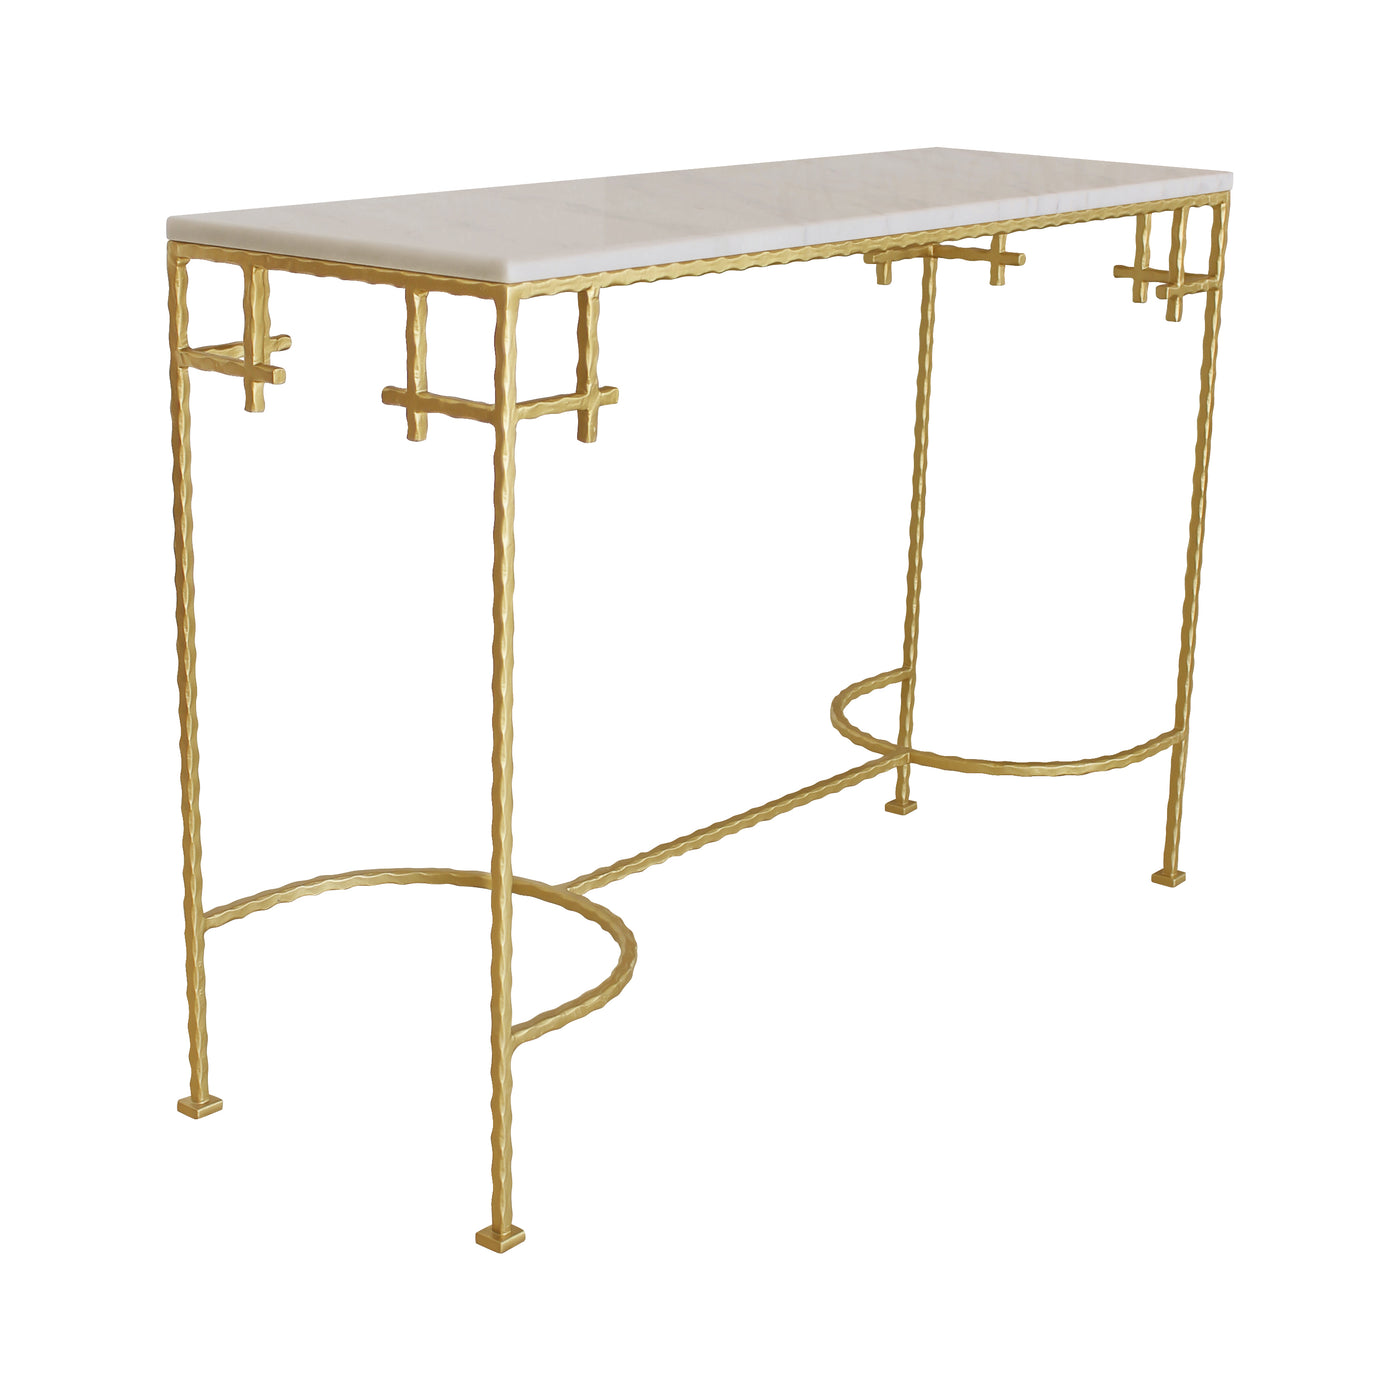 A modern rectangular wrought iron console table in a golden finish, topped with a white marble